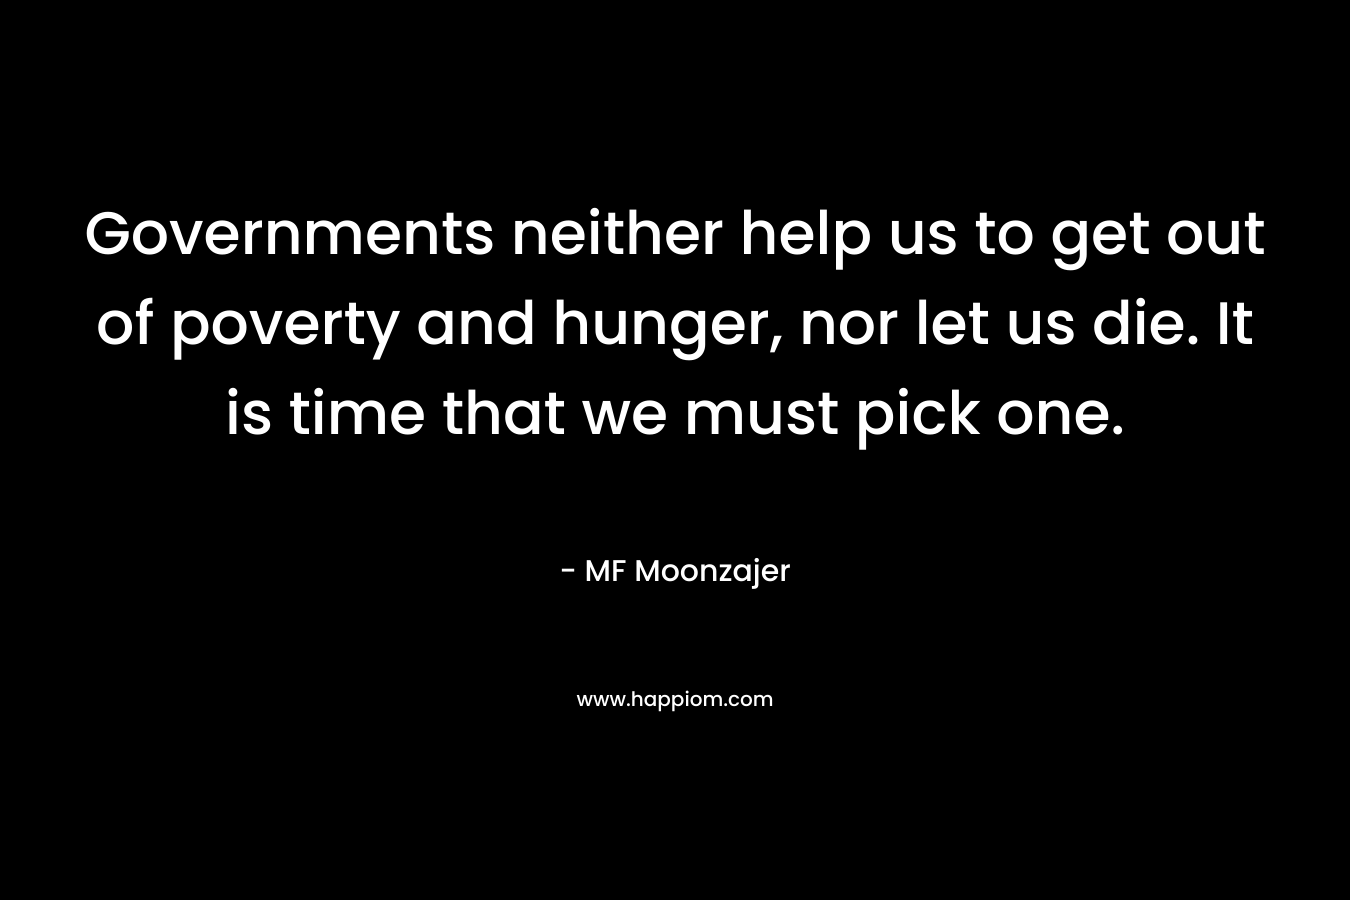 Governments neither help us to get out of poverty and hunger, nor let us die. It is time that we must pick one.